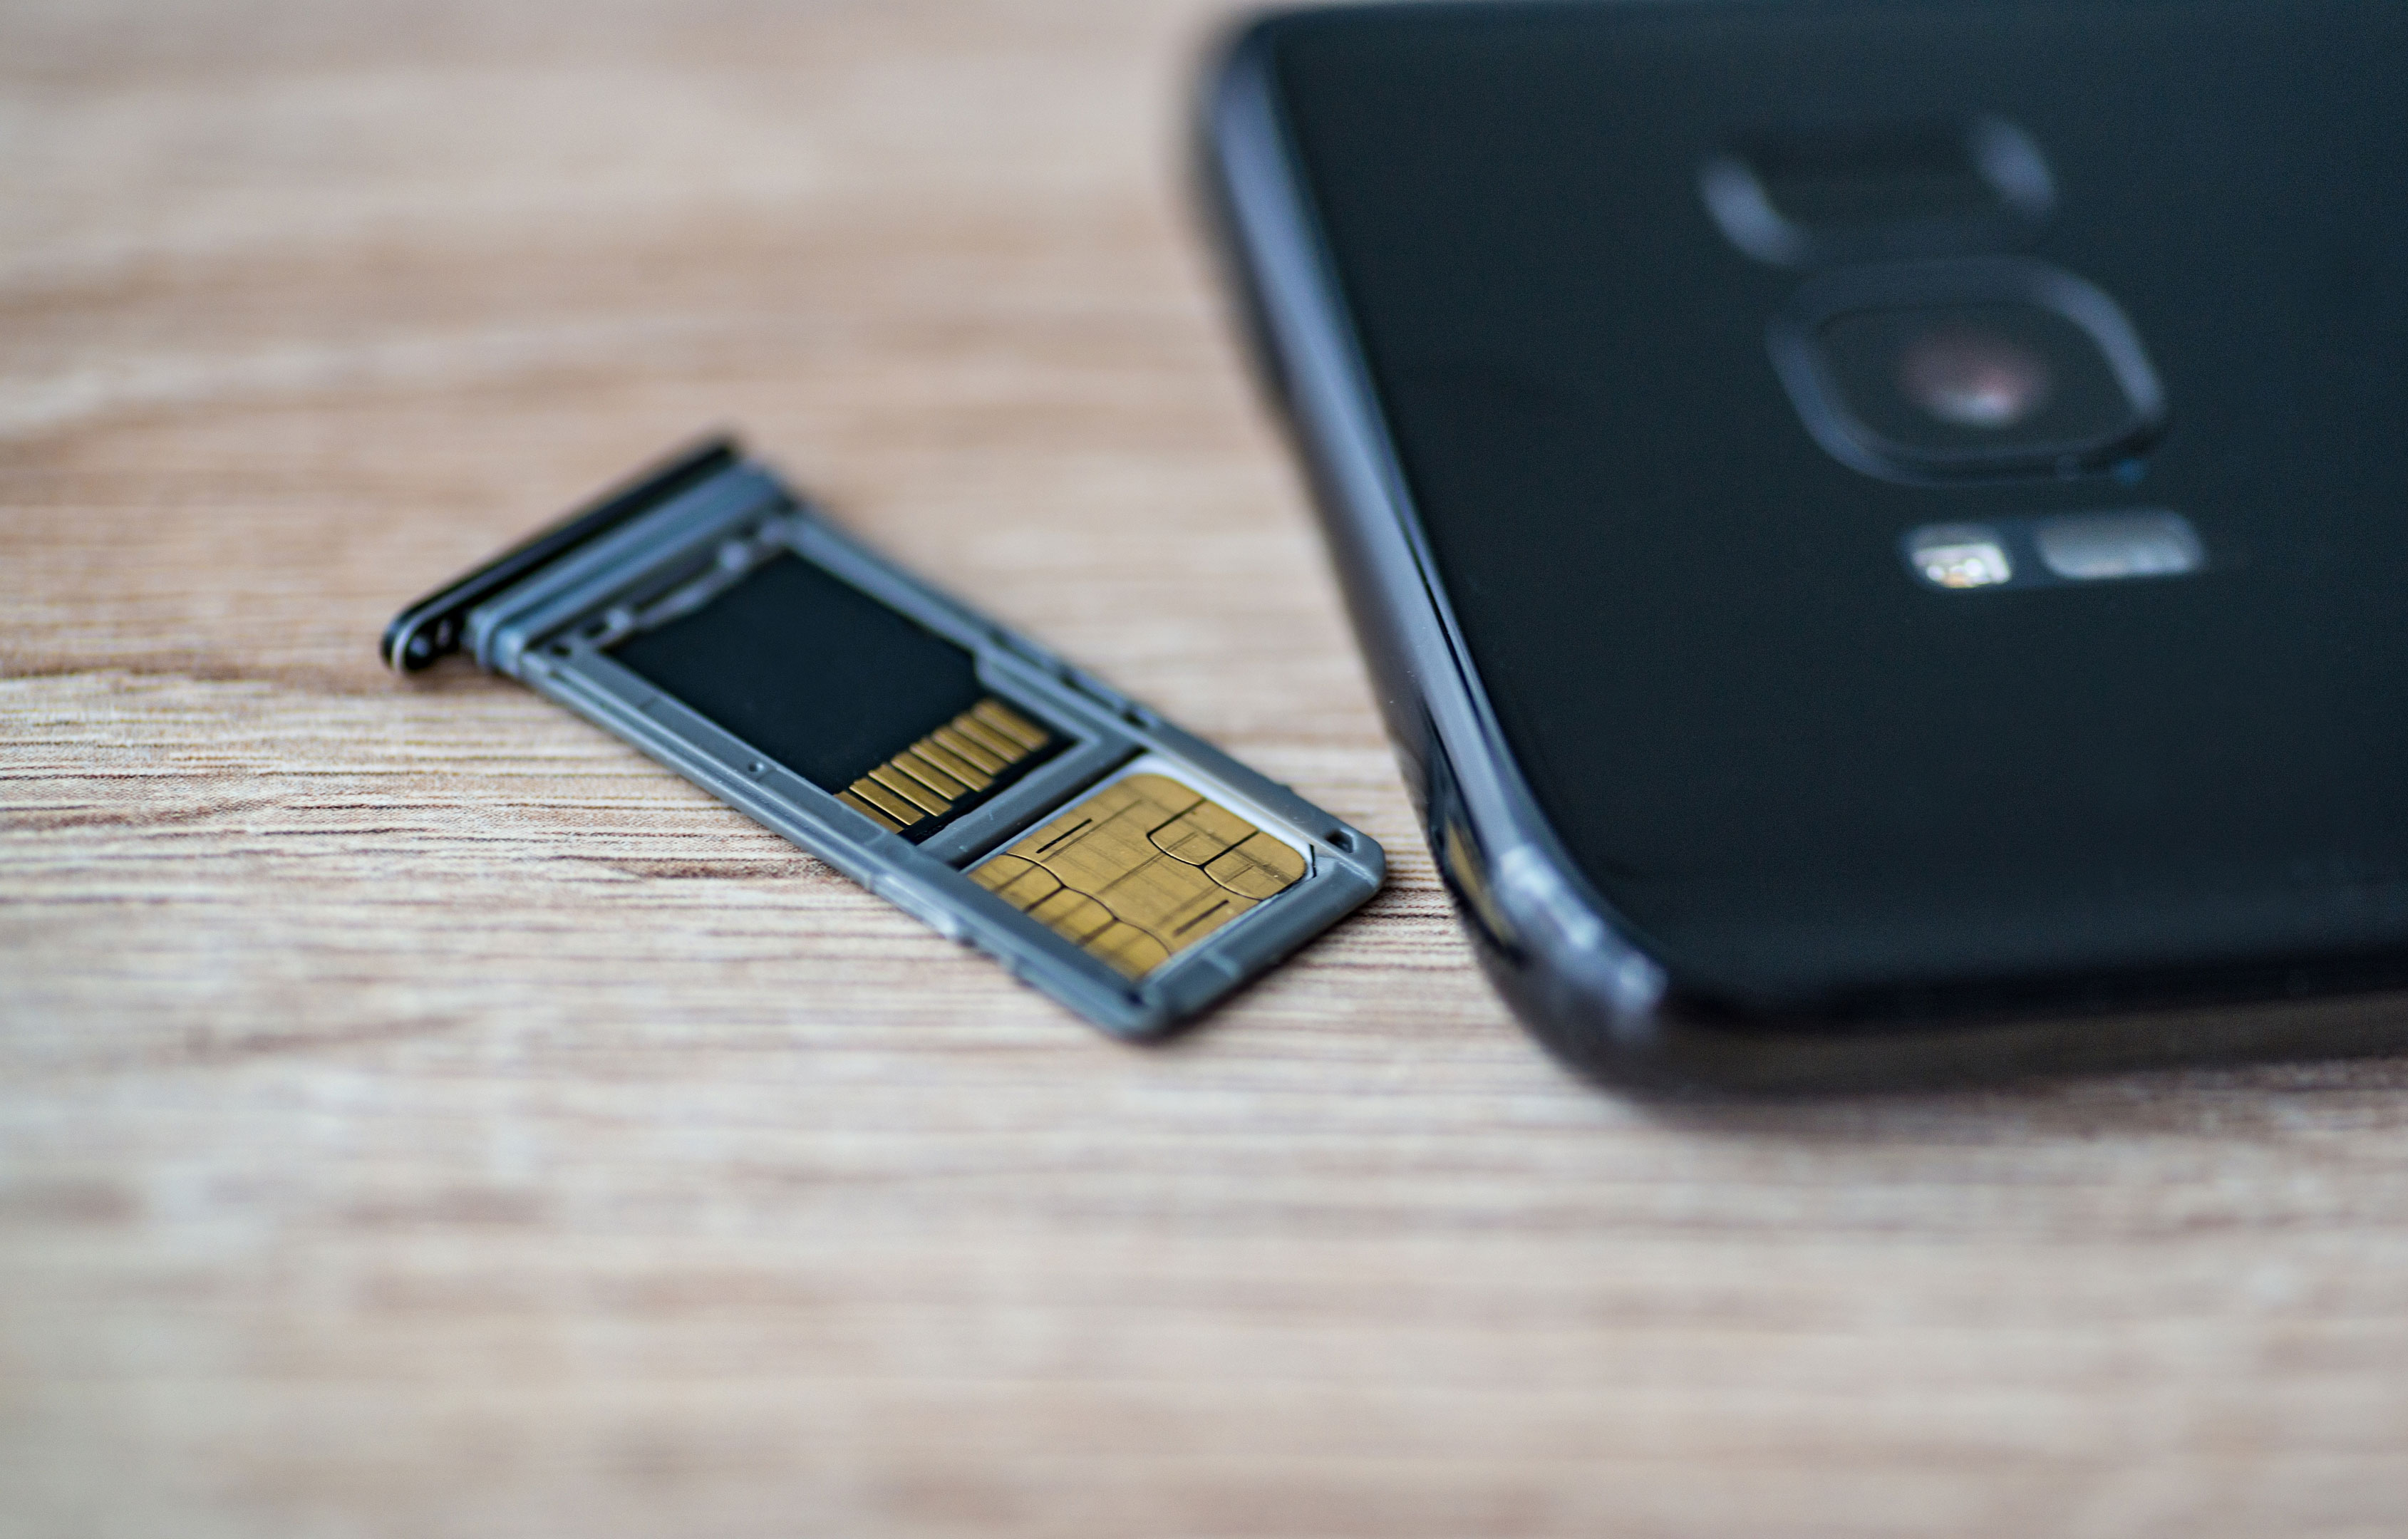 recruit In honor Withered How to save photos to SD card on your Android phone | NextPit